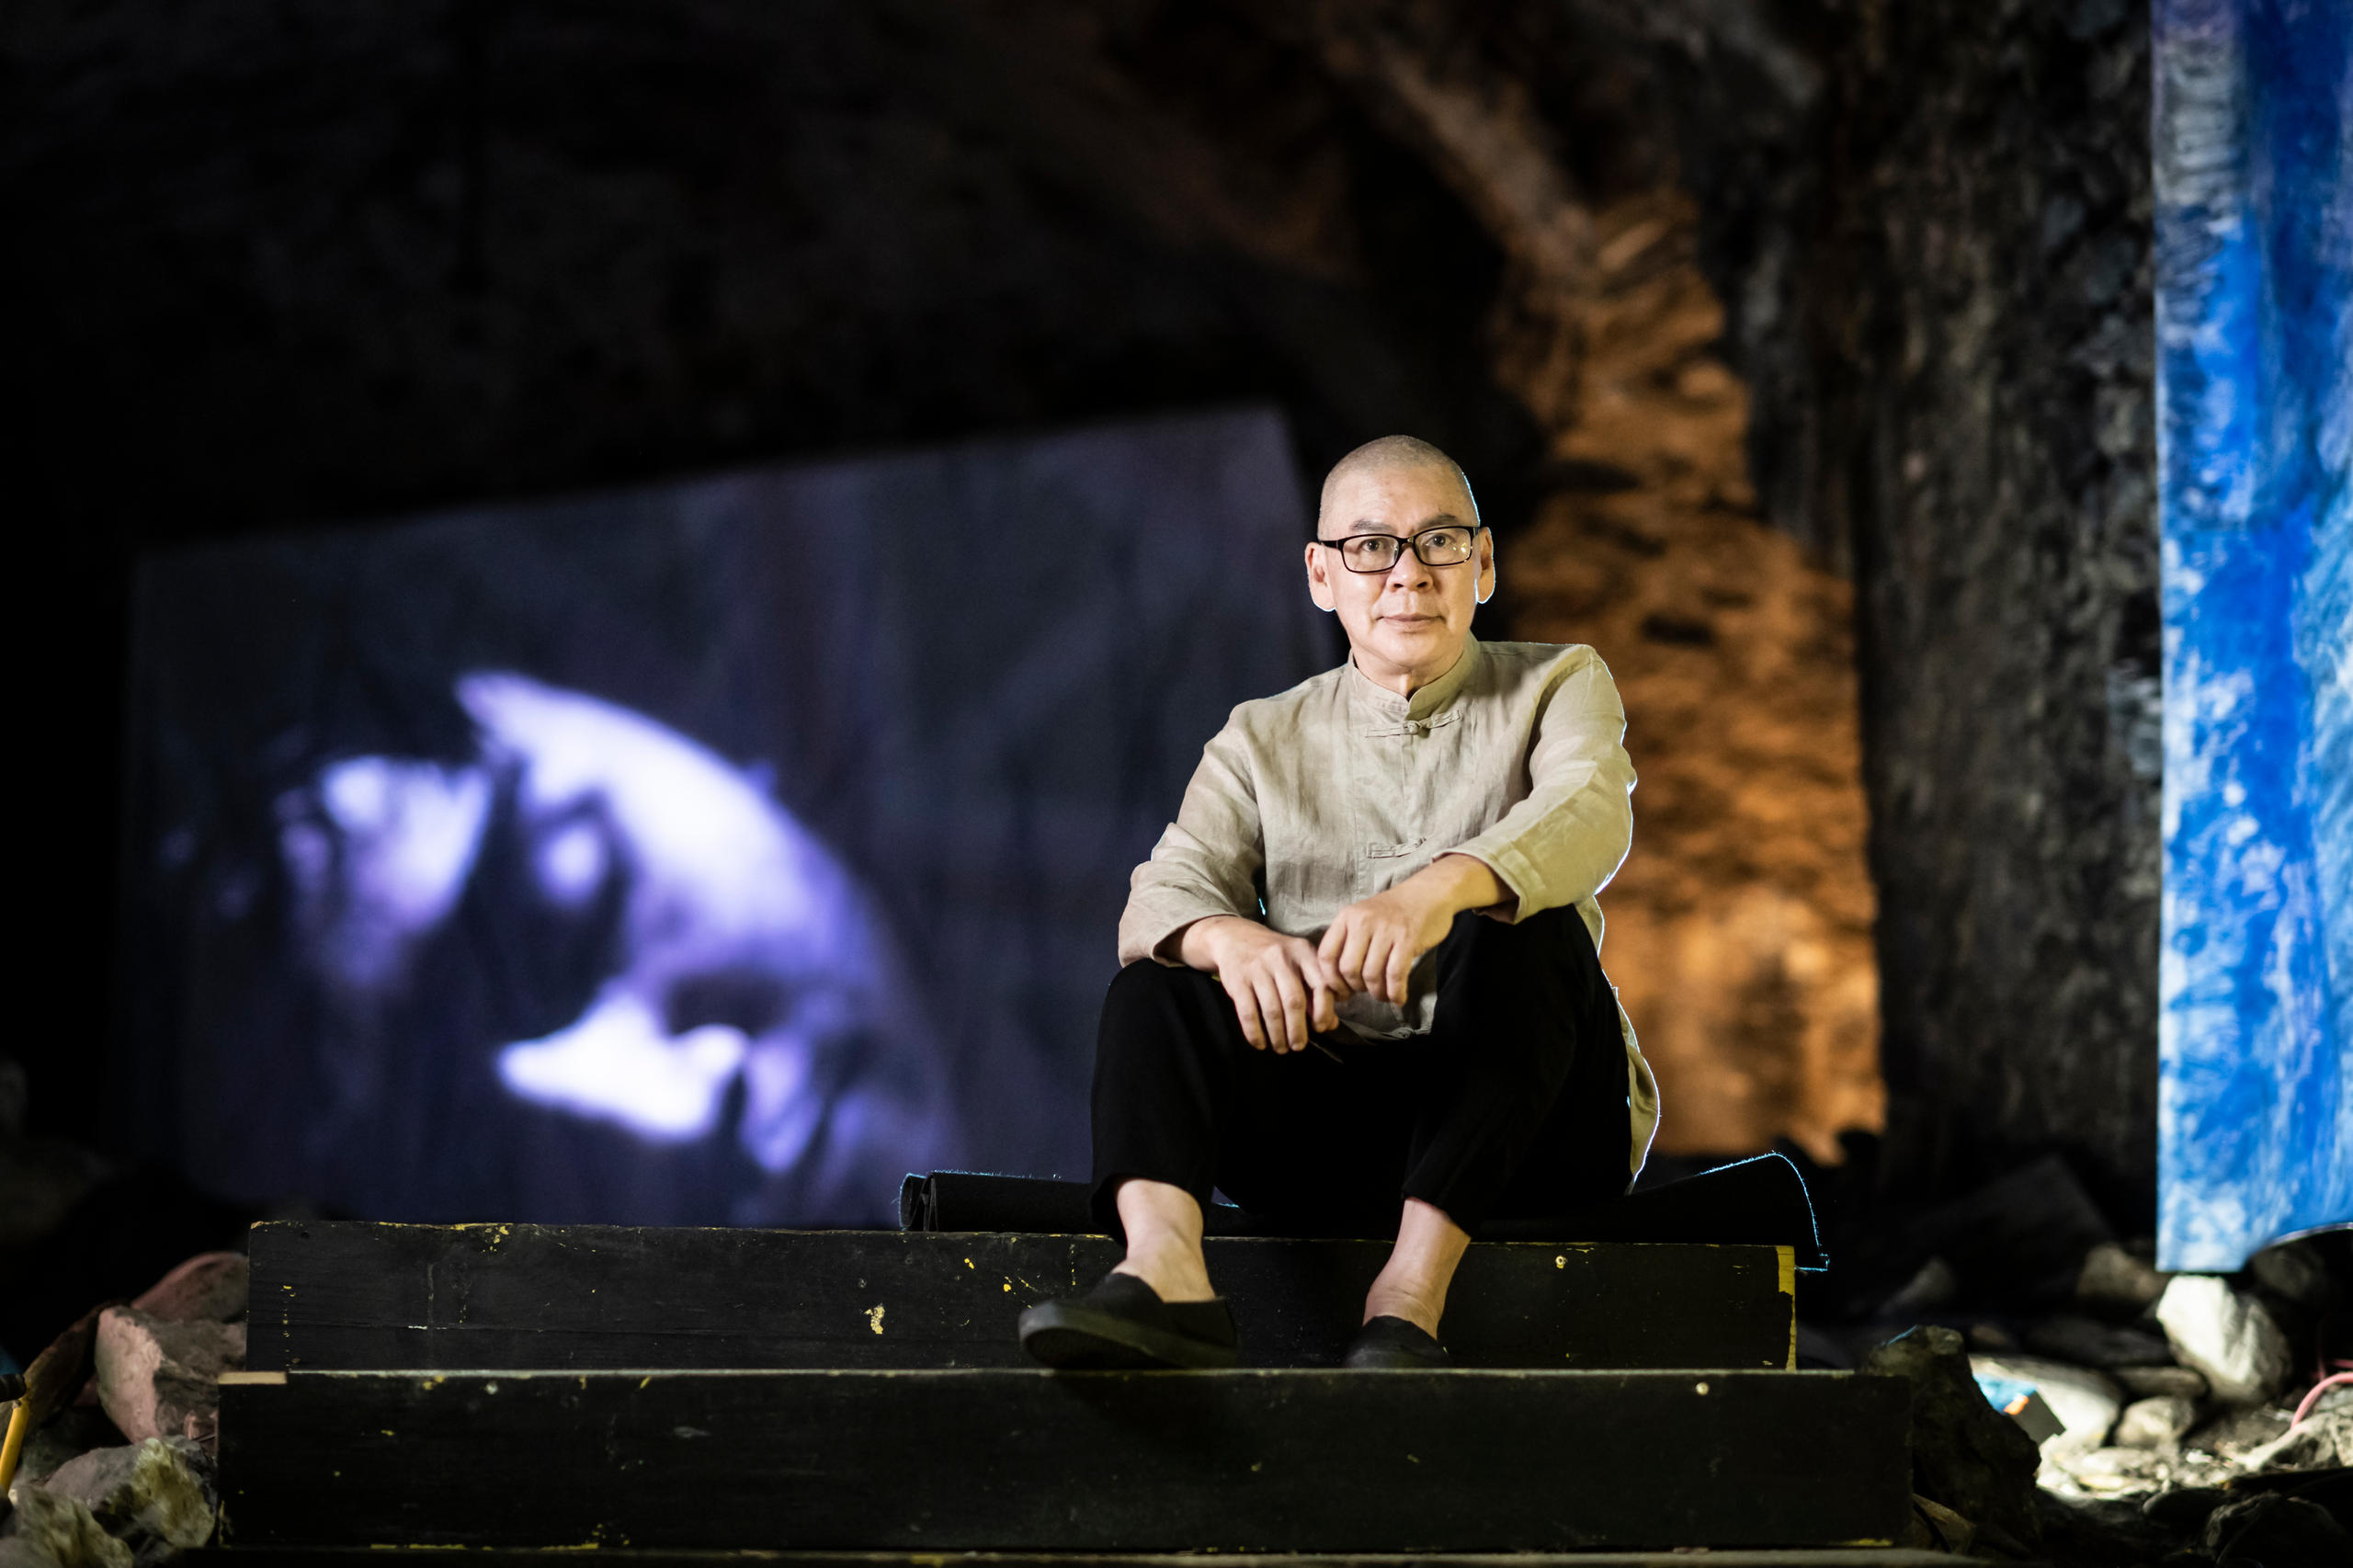 Tsai ming Liang at the site of his film installation in Locarno